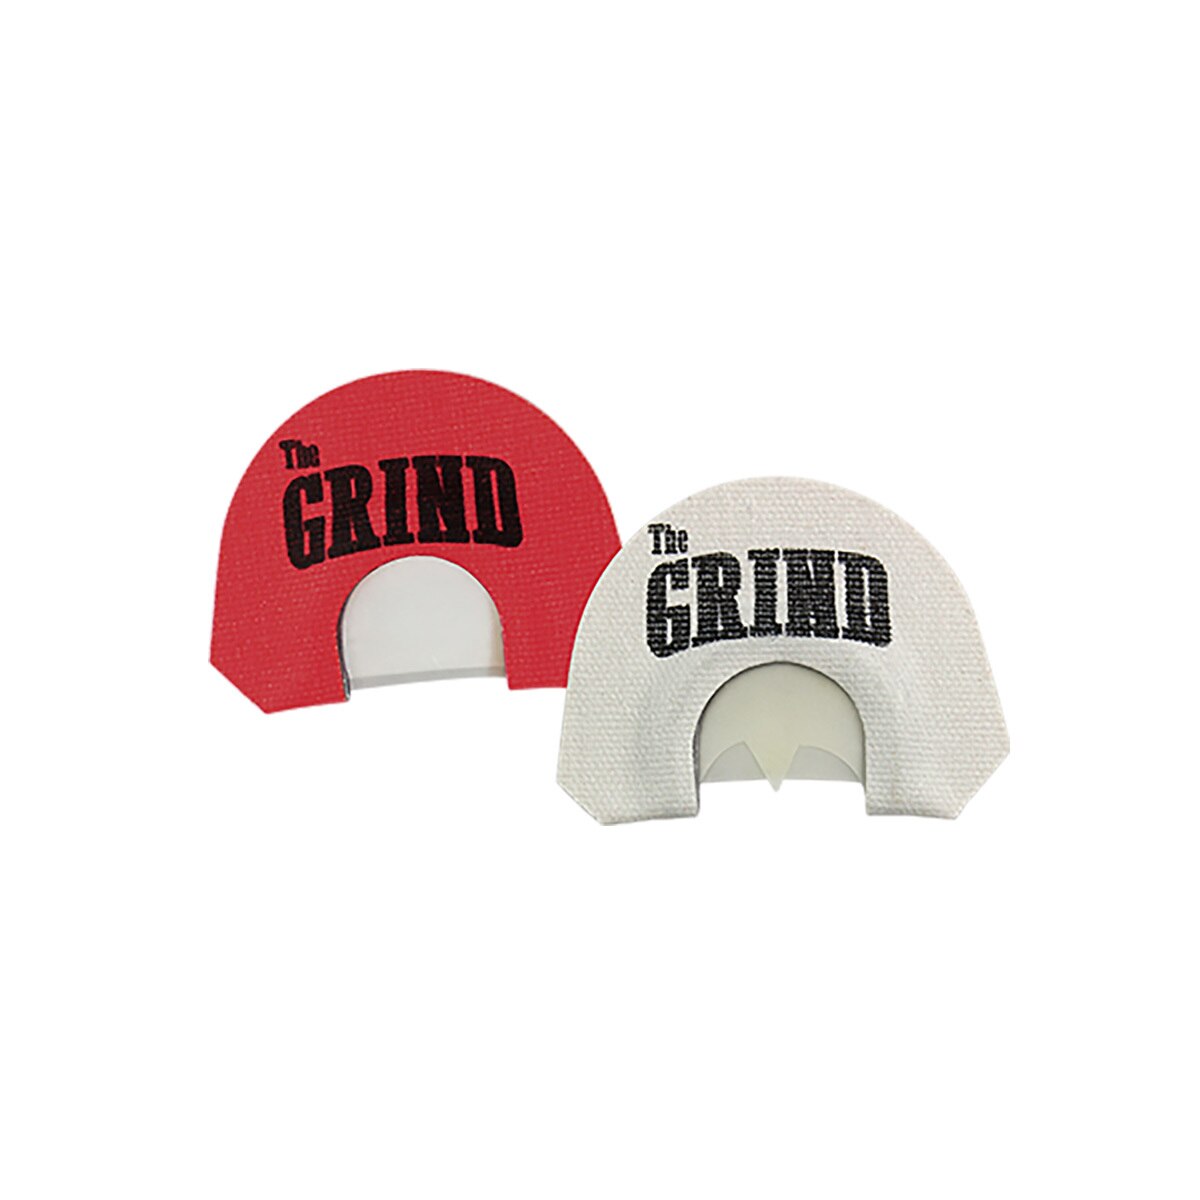 THE GRIND YOUTH/BEGINNER MOUTH CALLS